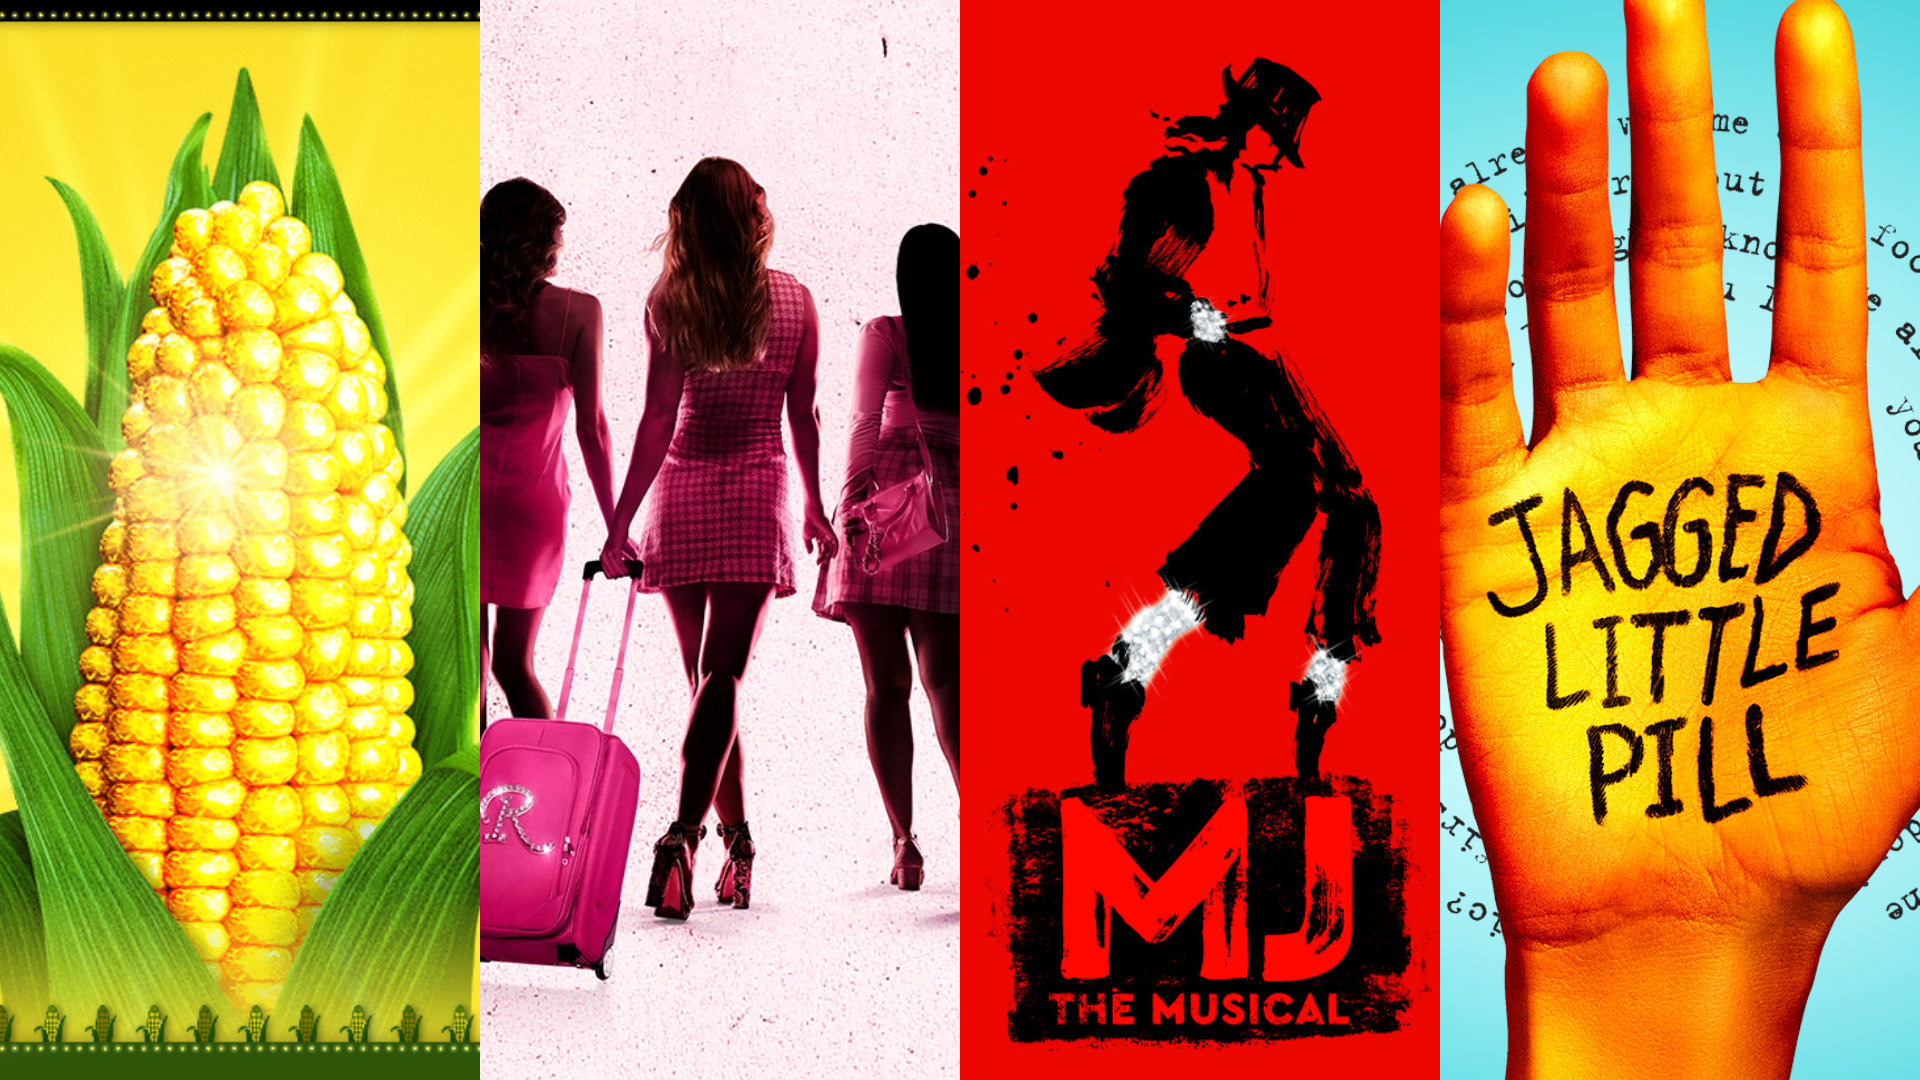 Broadway musicals coming to the West End